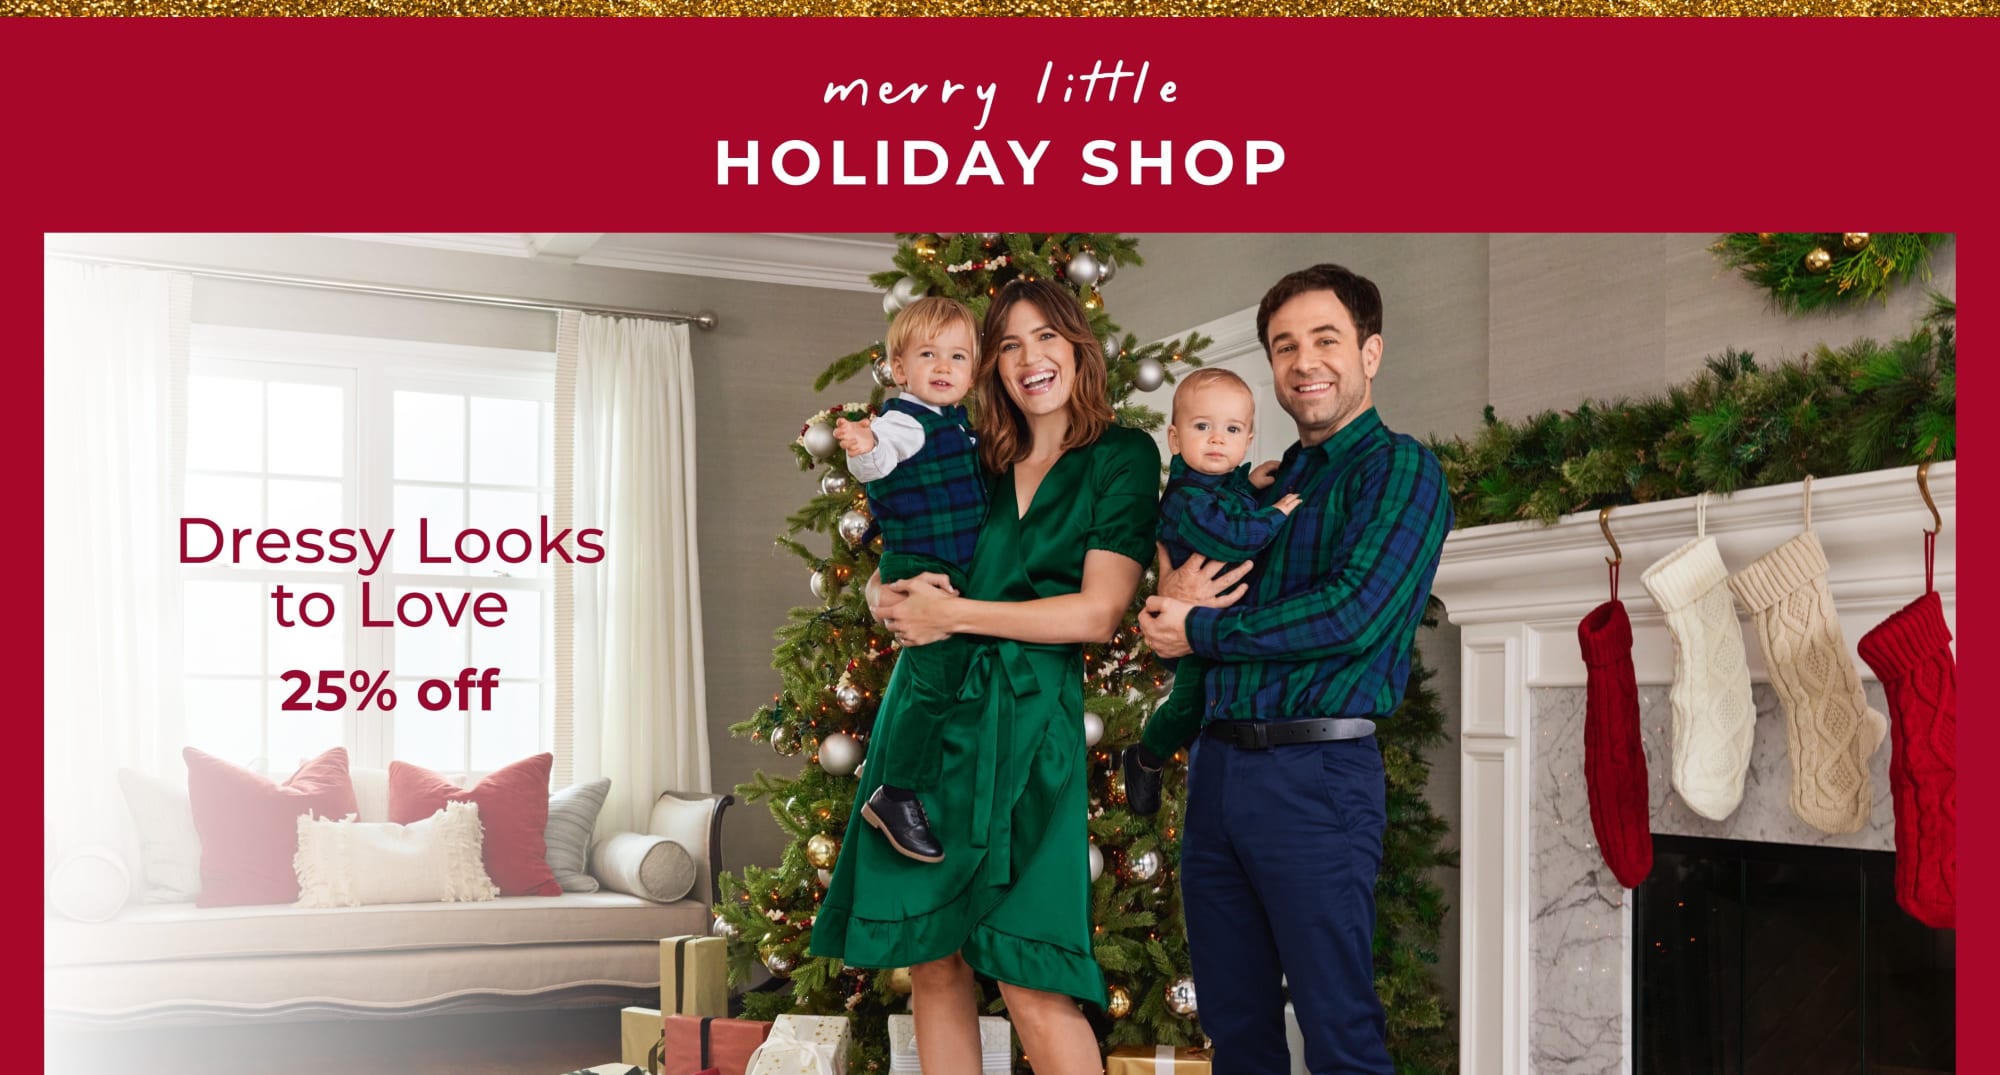 Merry Little Holiday Shop | Dressy Looks to Love | 25% off